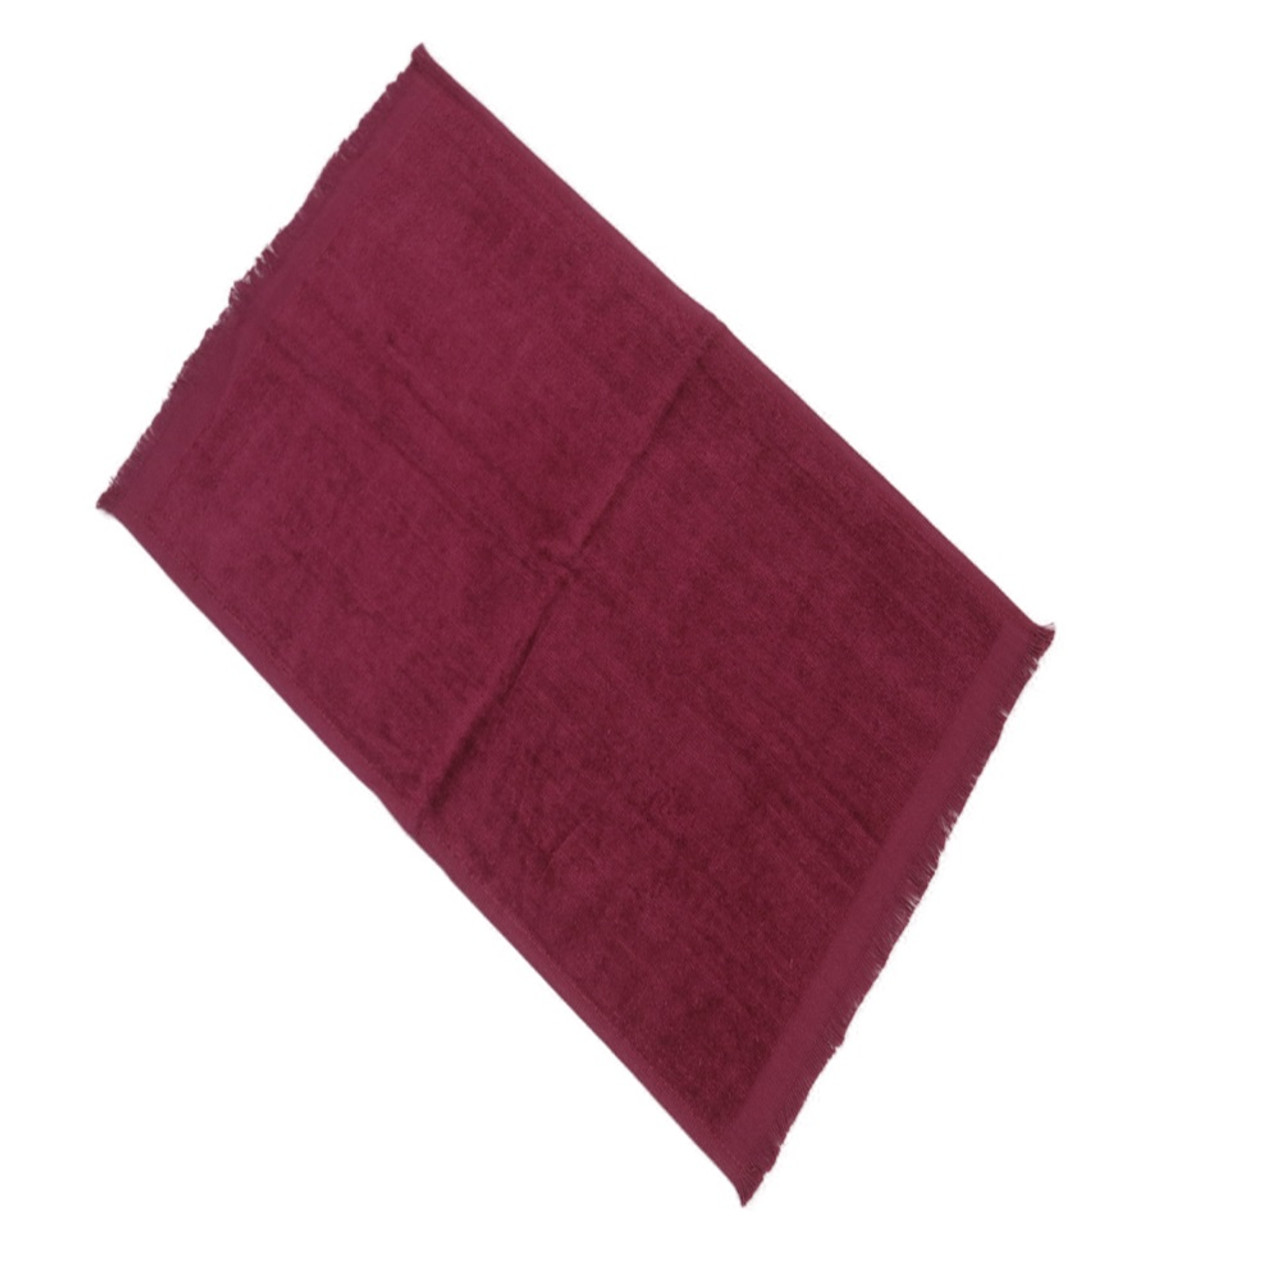 Burgundy Kitchen Towel Embroidered Grateful, Thankful, and Blessed 